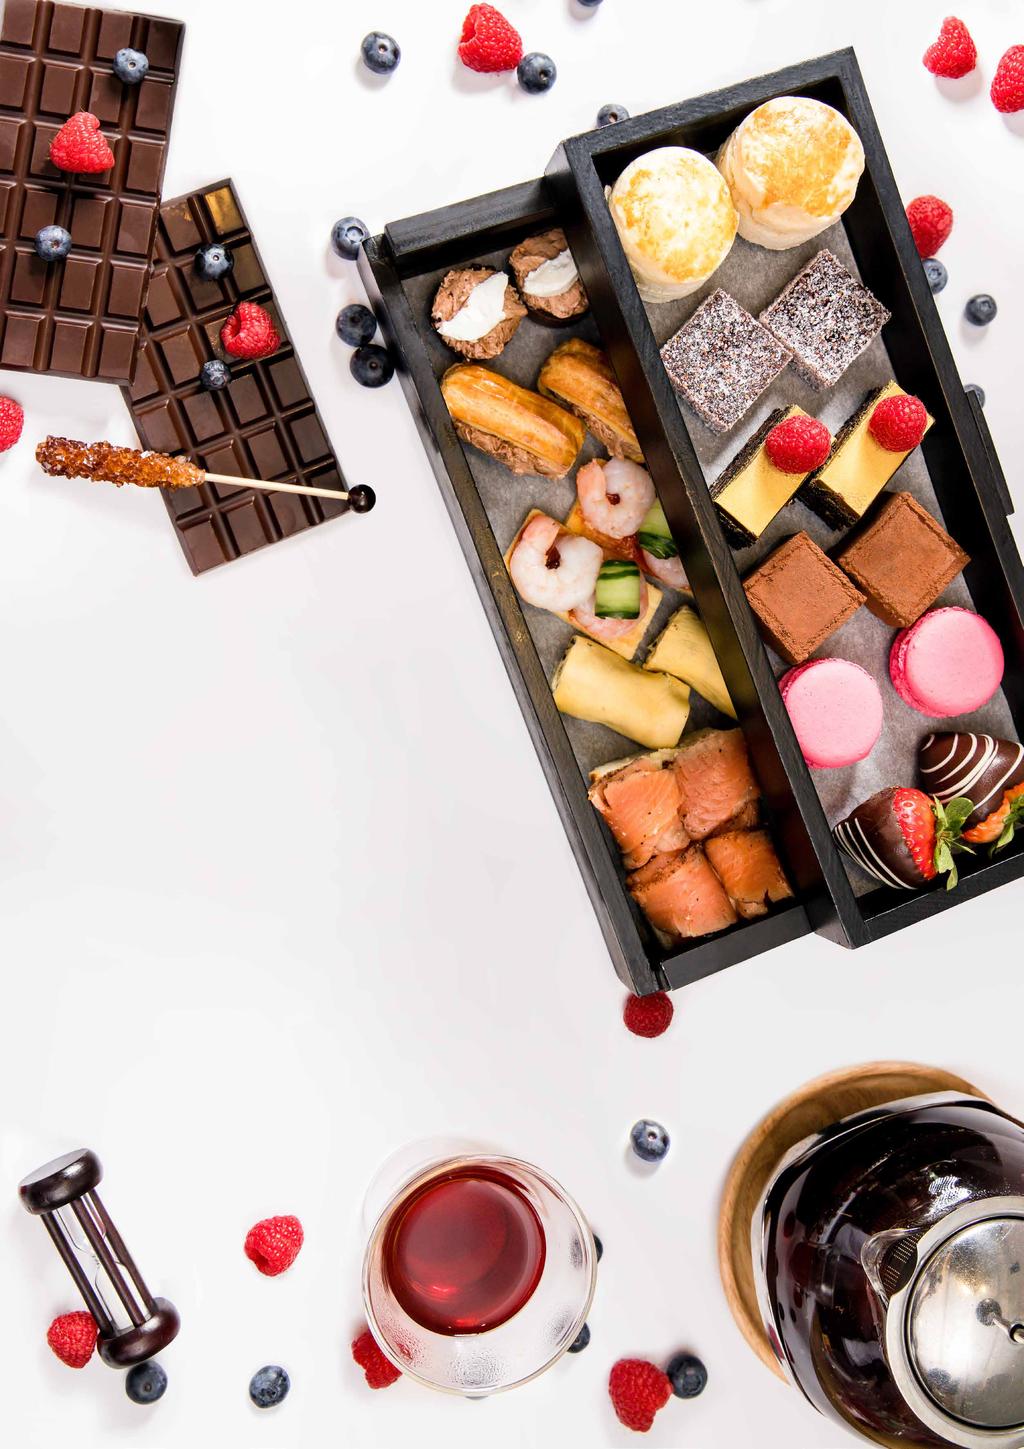 (AVEC AMOUR) AFTERNOON TEA TREAT + SPA MOMENT Love in the afternoon. A sweet and savoury affair unfolds combining a romantic afternoon tea with an enlivening spa session.